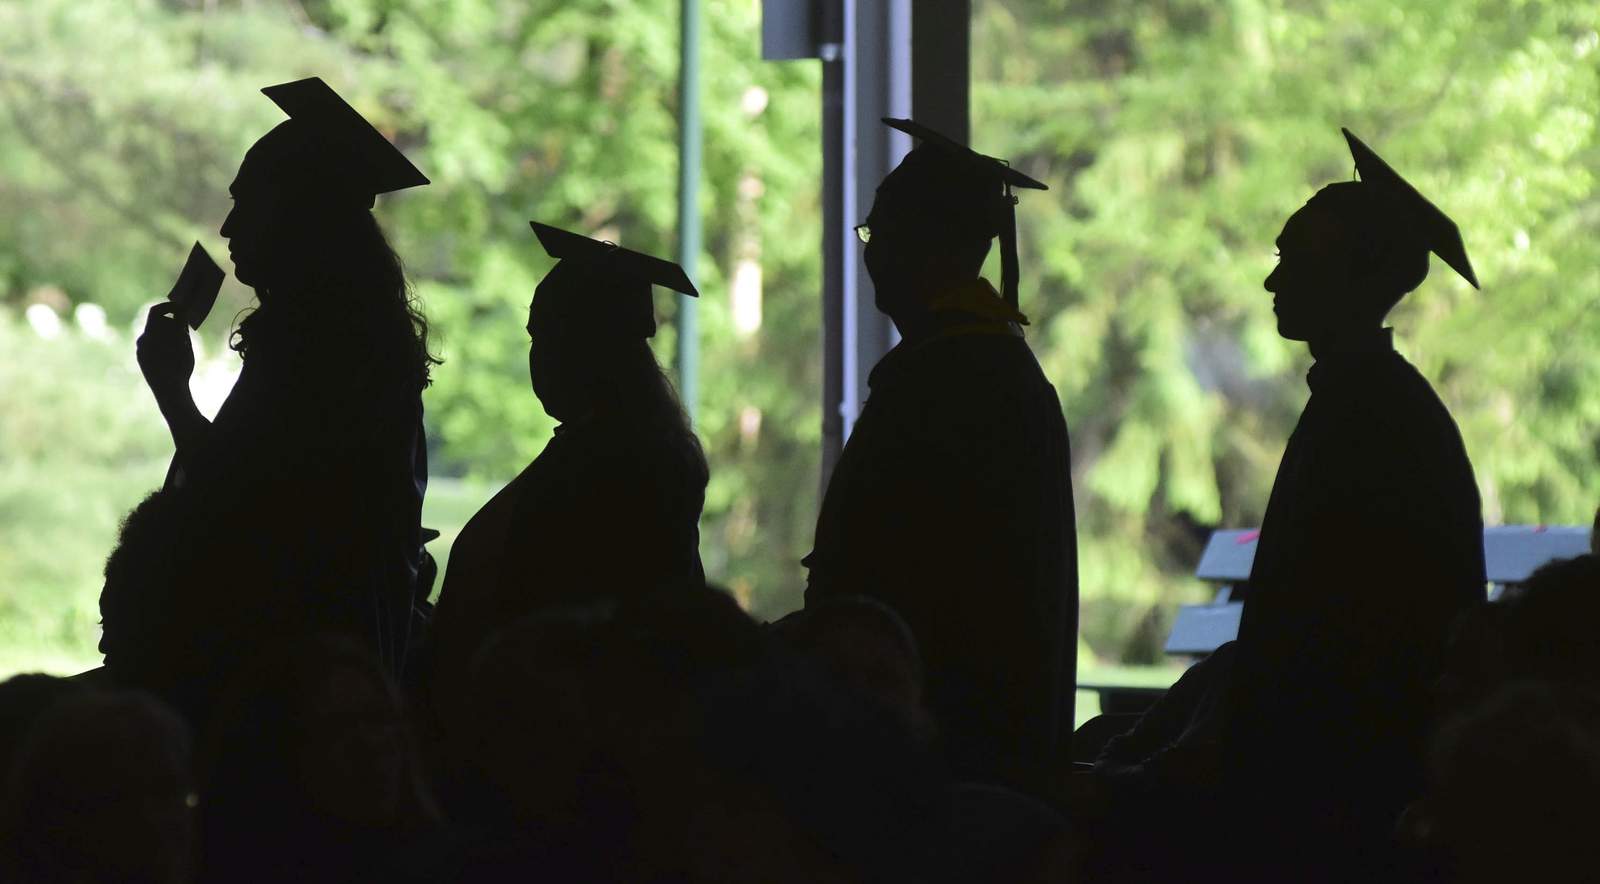 Shadow lenders can leave college students in the dark